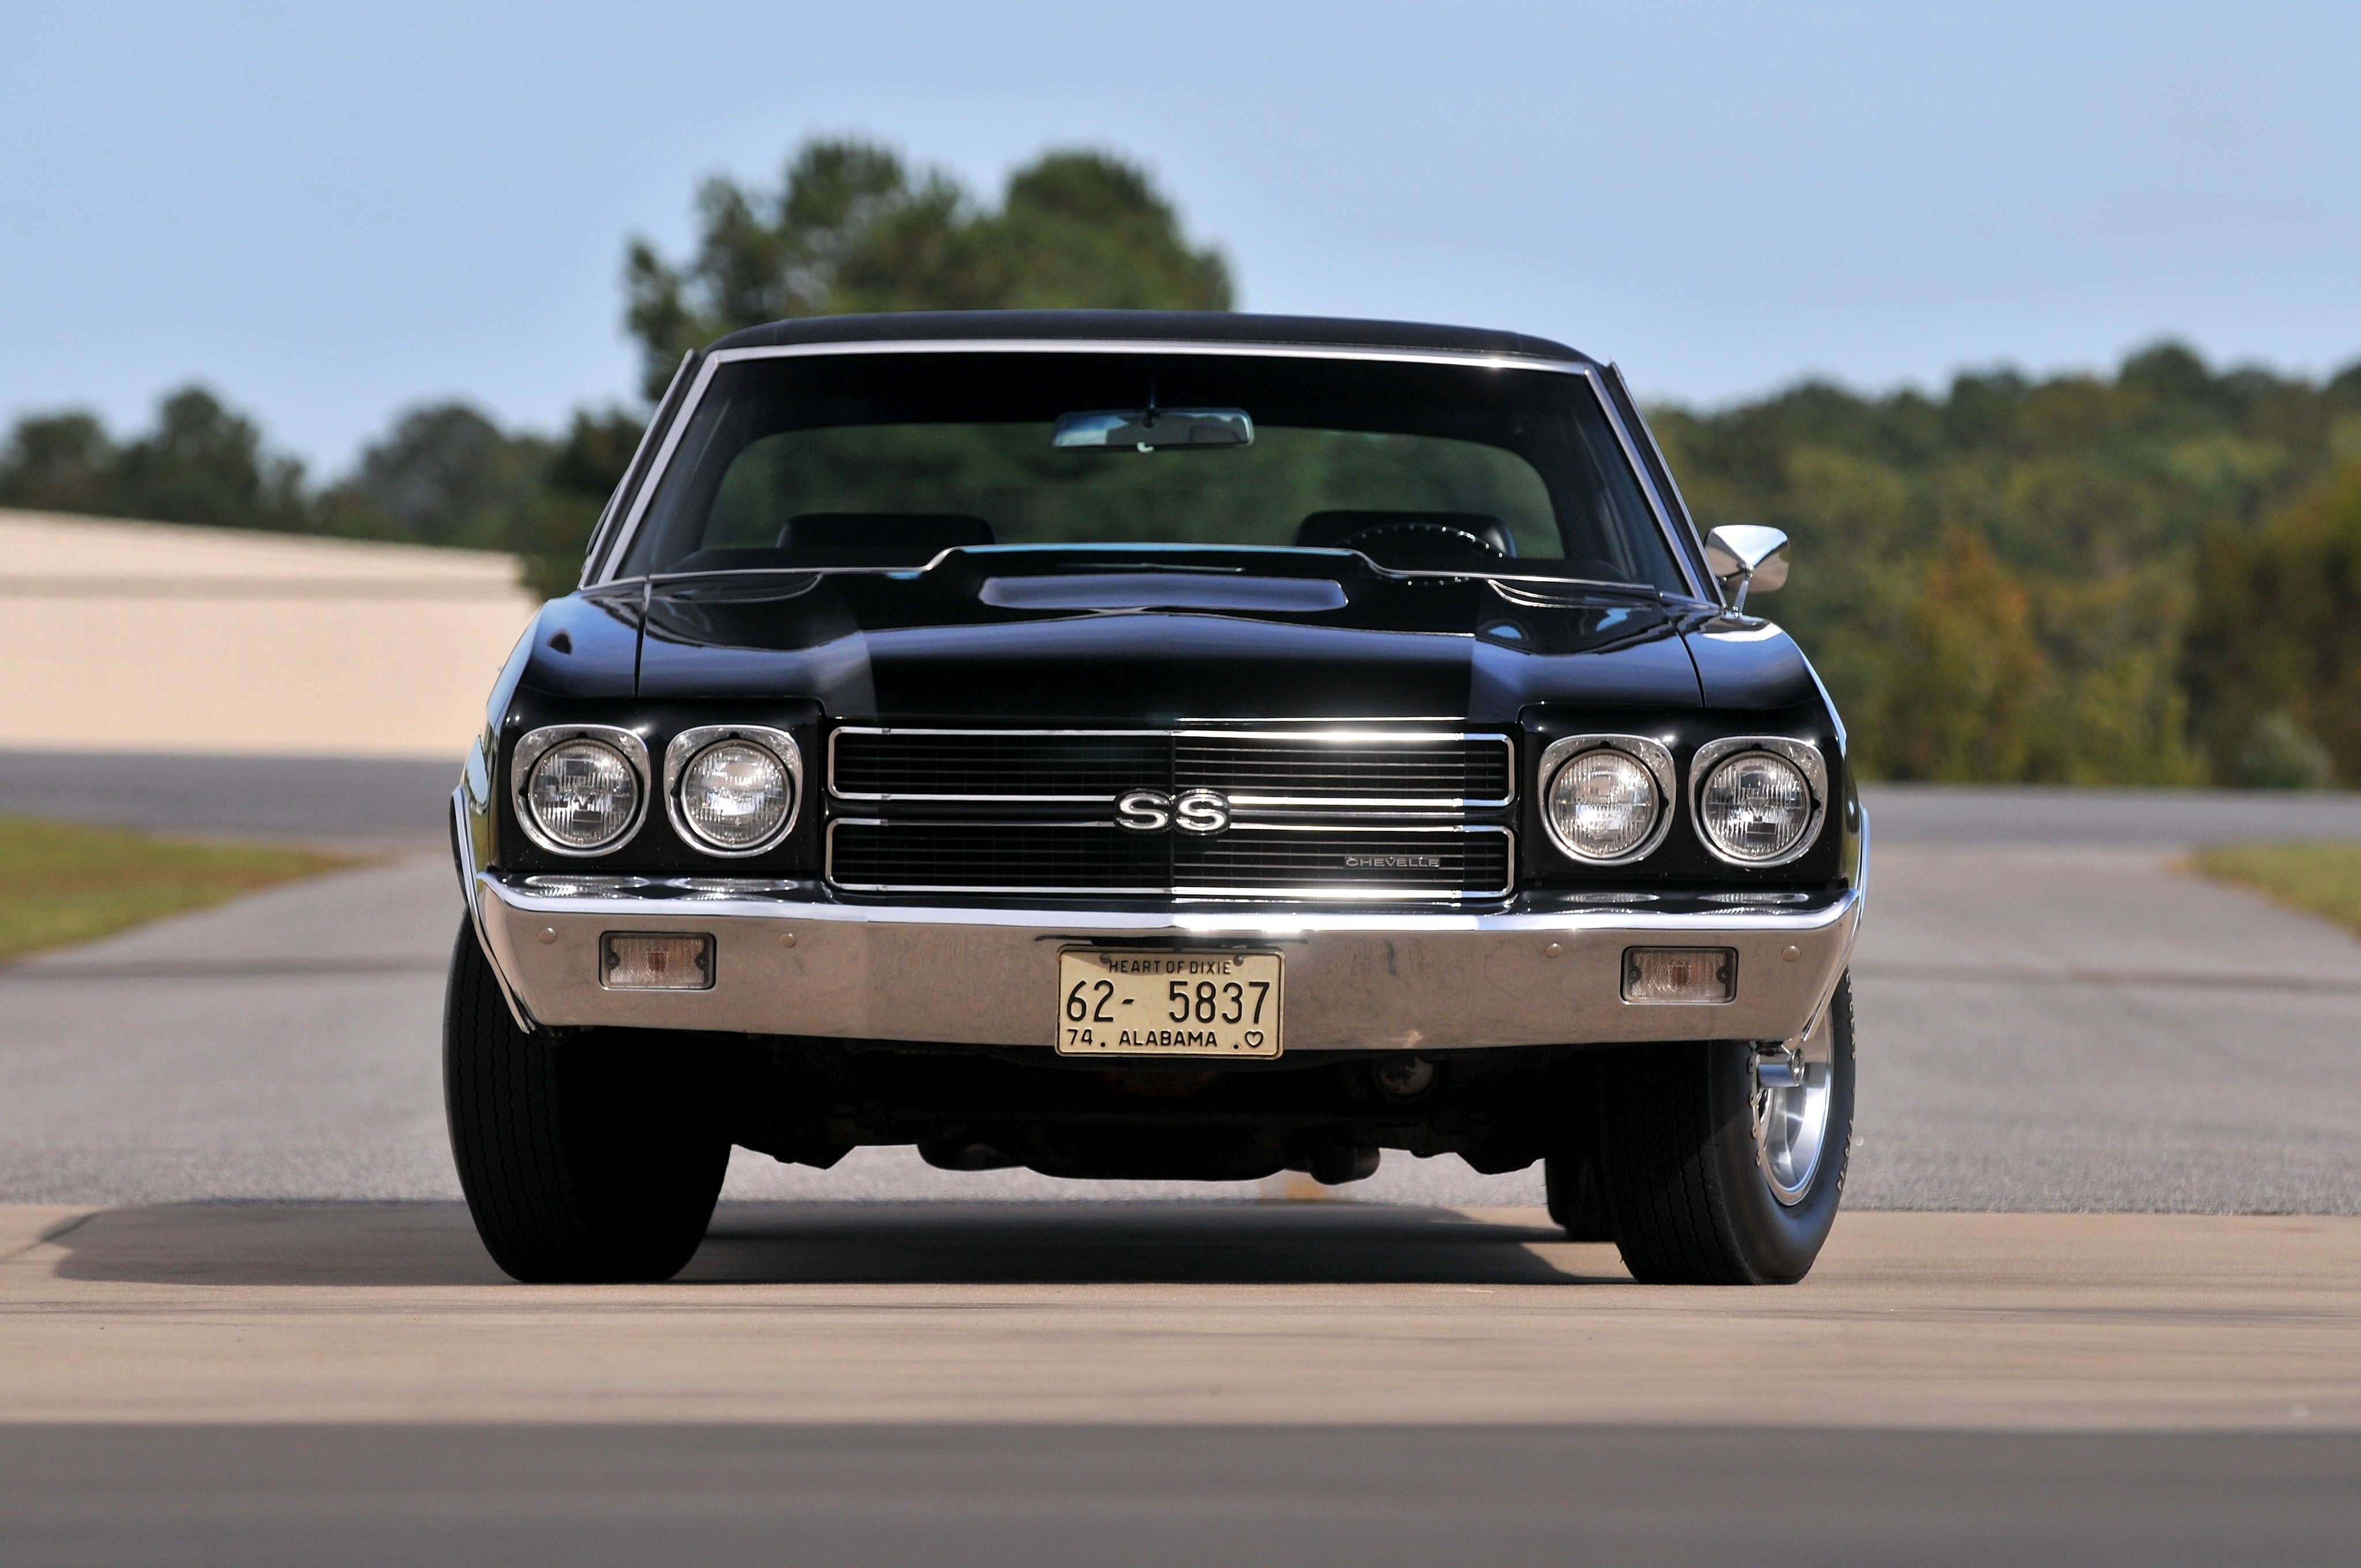 1970 Chevrolet Chevelle S S 454 LS6 Hardtop Coupe muscle